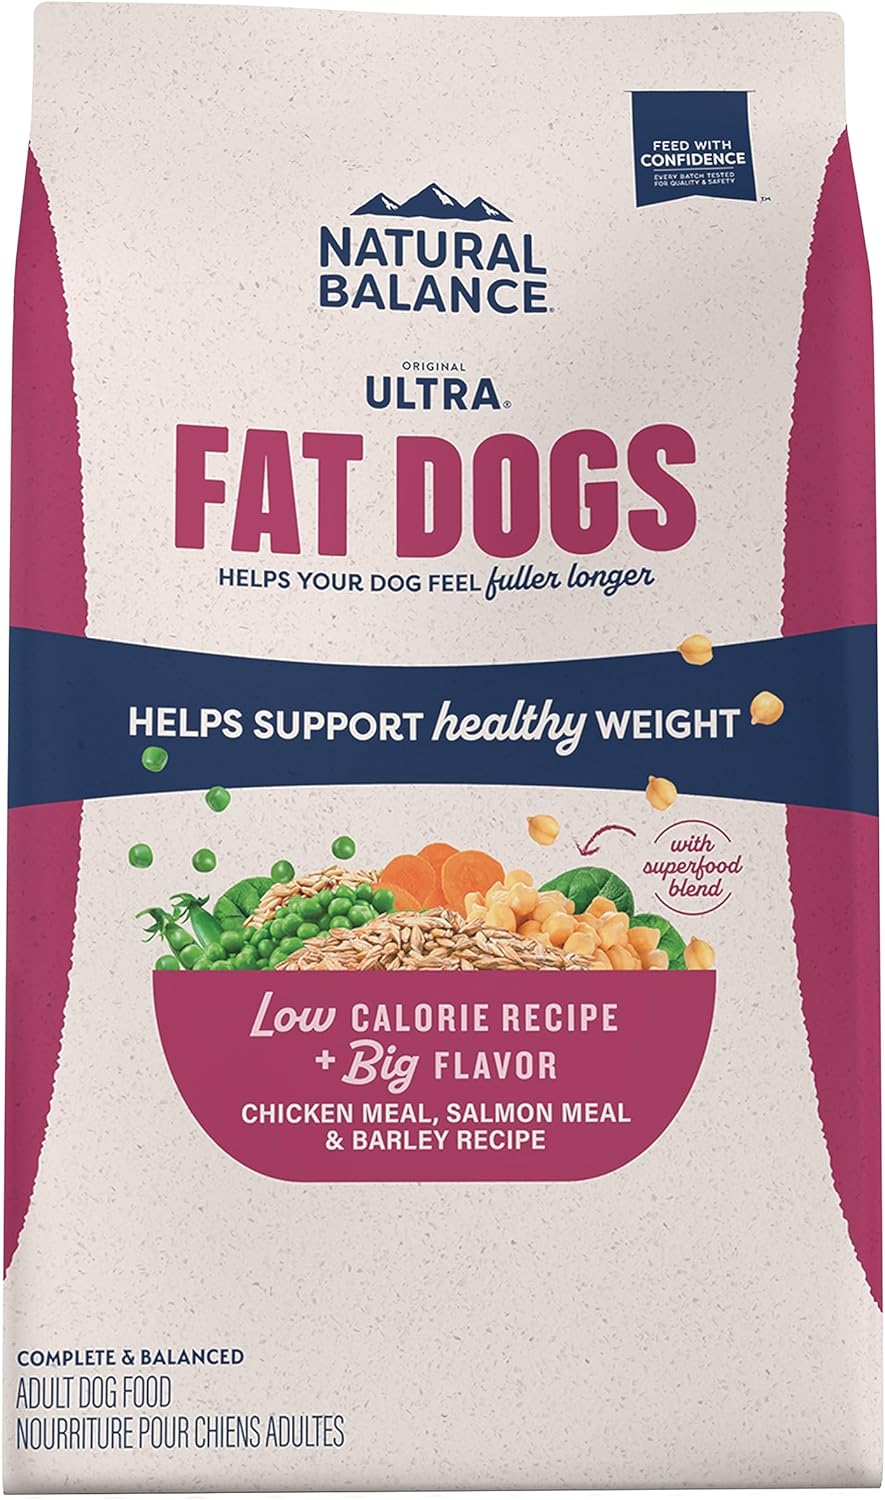 Natural Balance Fat Dogs Low Calorie Dry Dog Food – Gallery Image 1